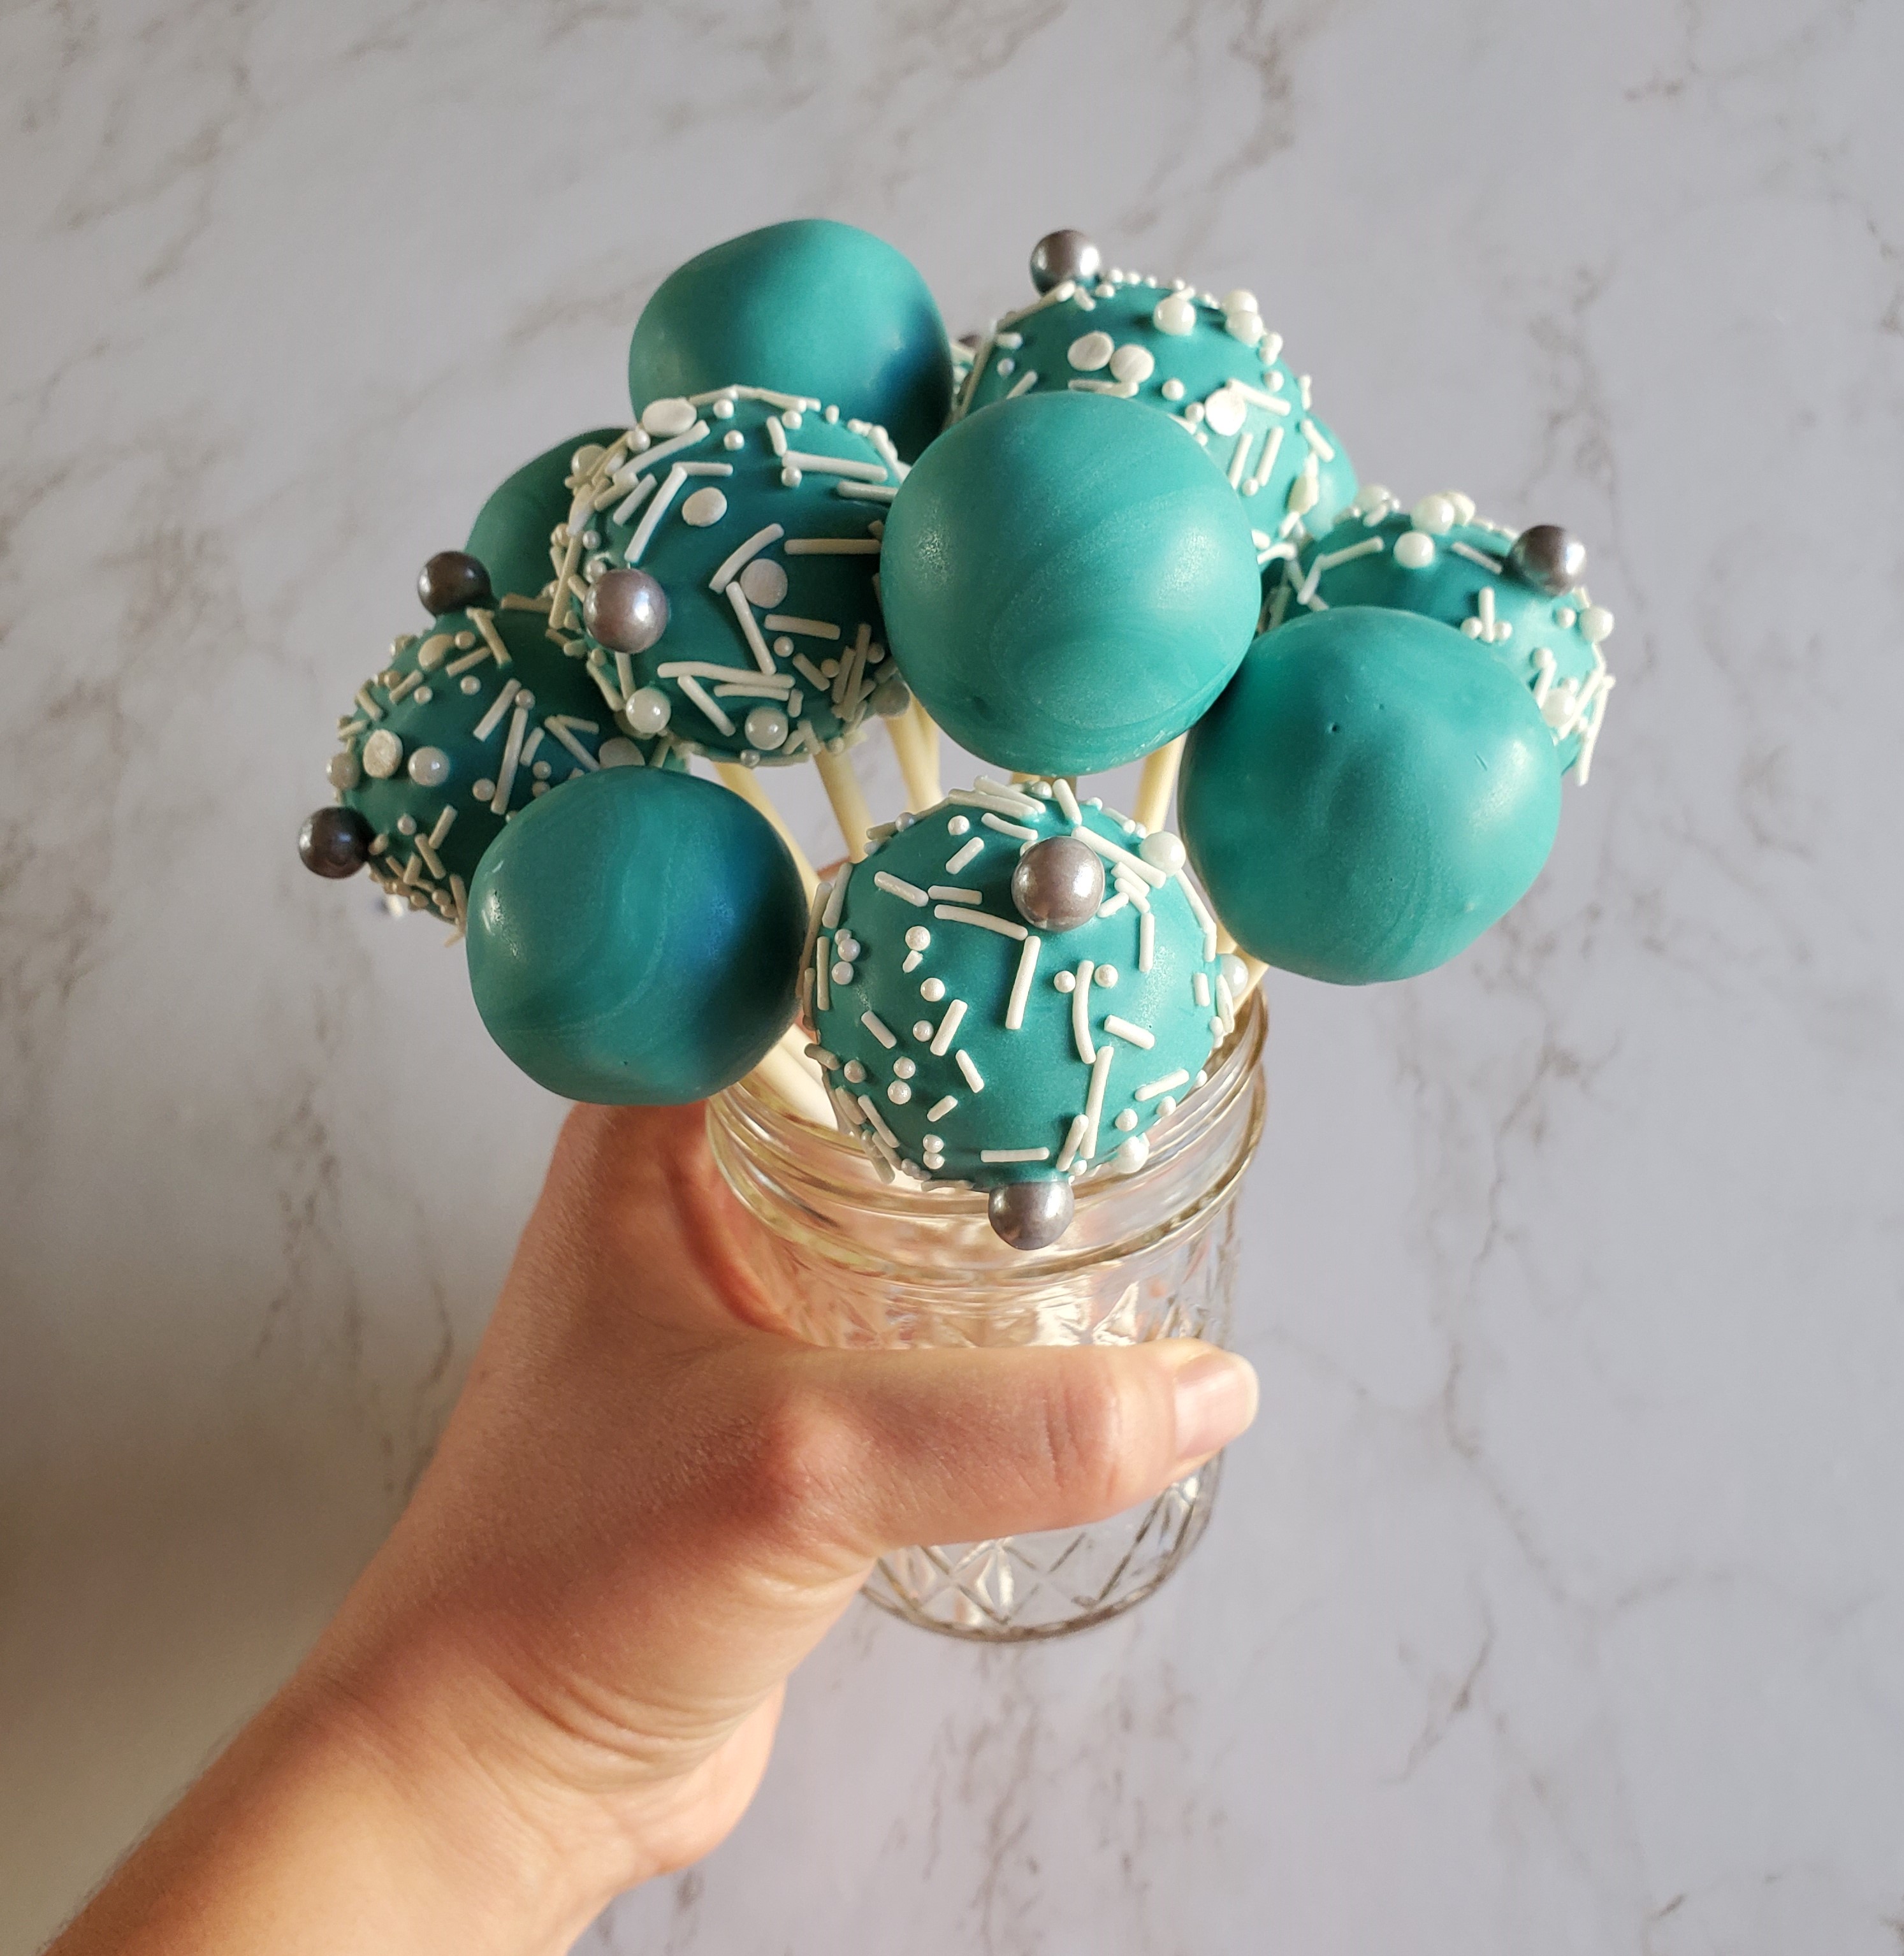 A bouquet of turquoise sprinkled cake pops in a glass jar, held up by a hand in front of a marble background.